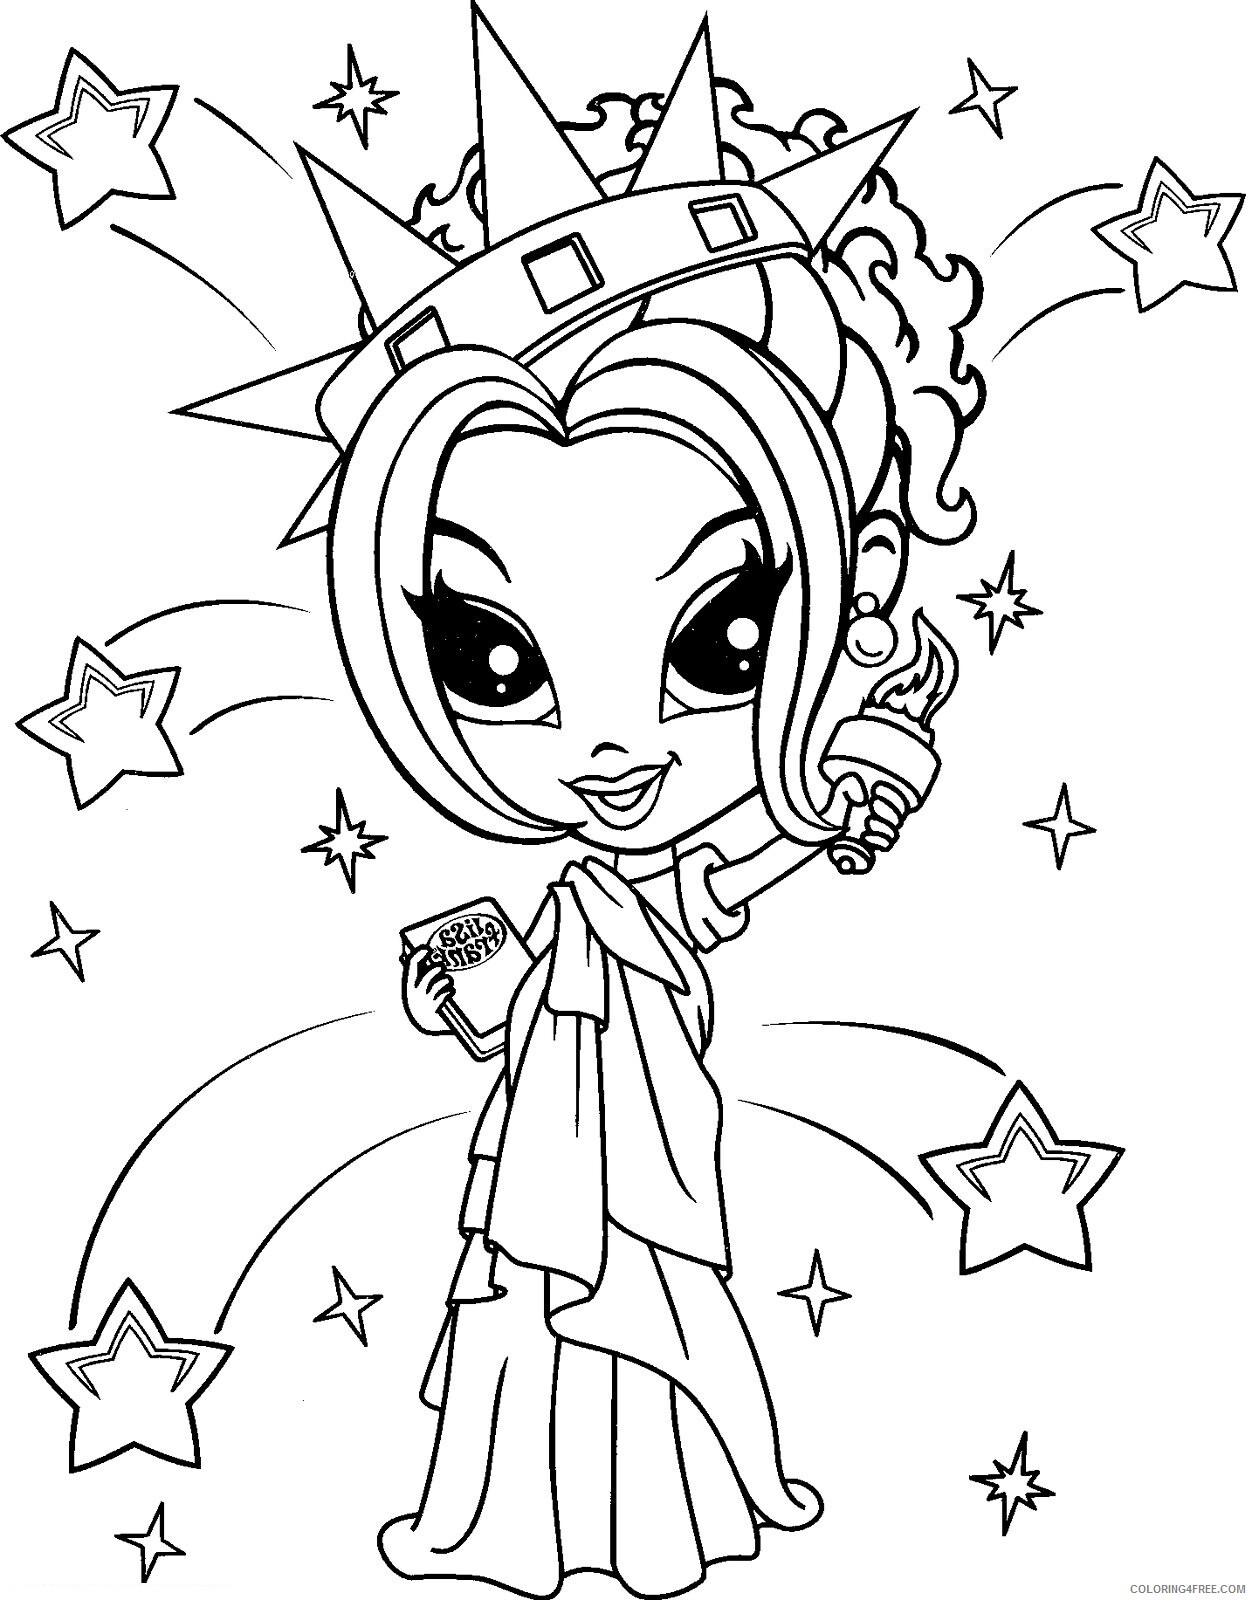 Az Coloring Pages of Dolls for Kids Printable Sheets doll jpg 2021 a 4473 Coloring4free